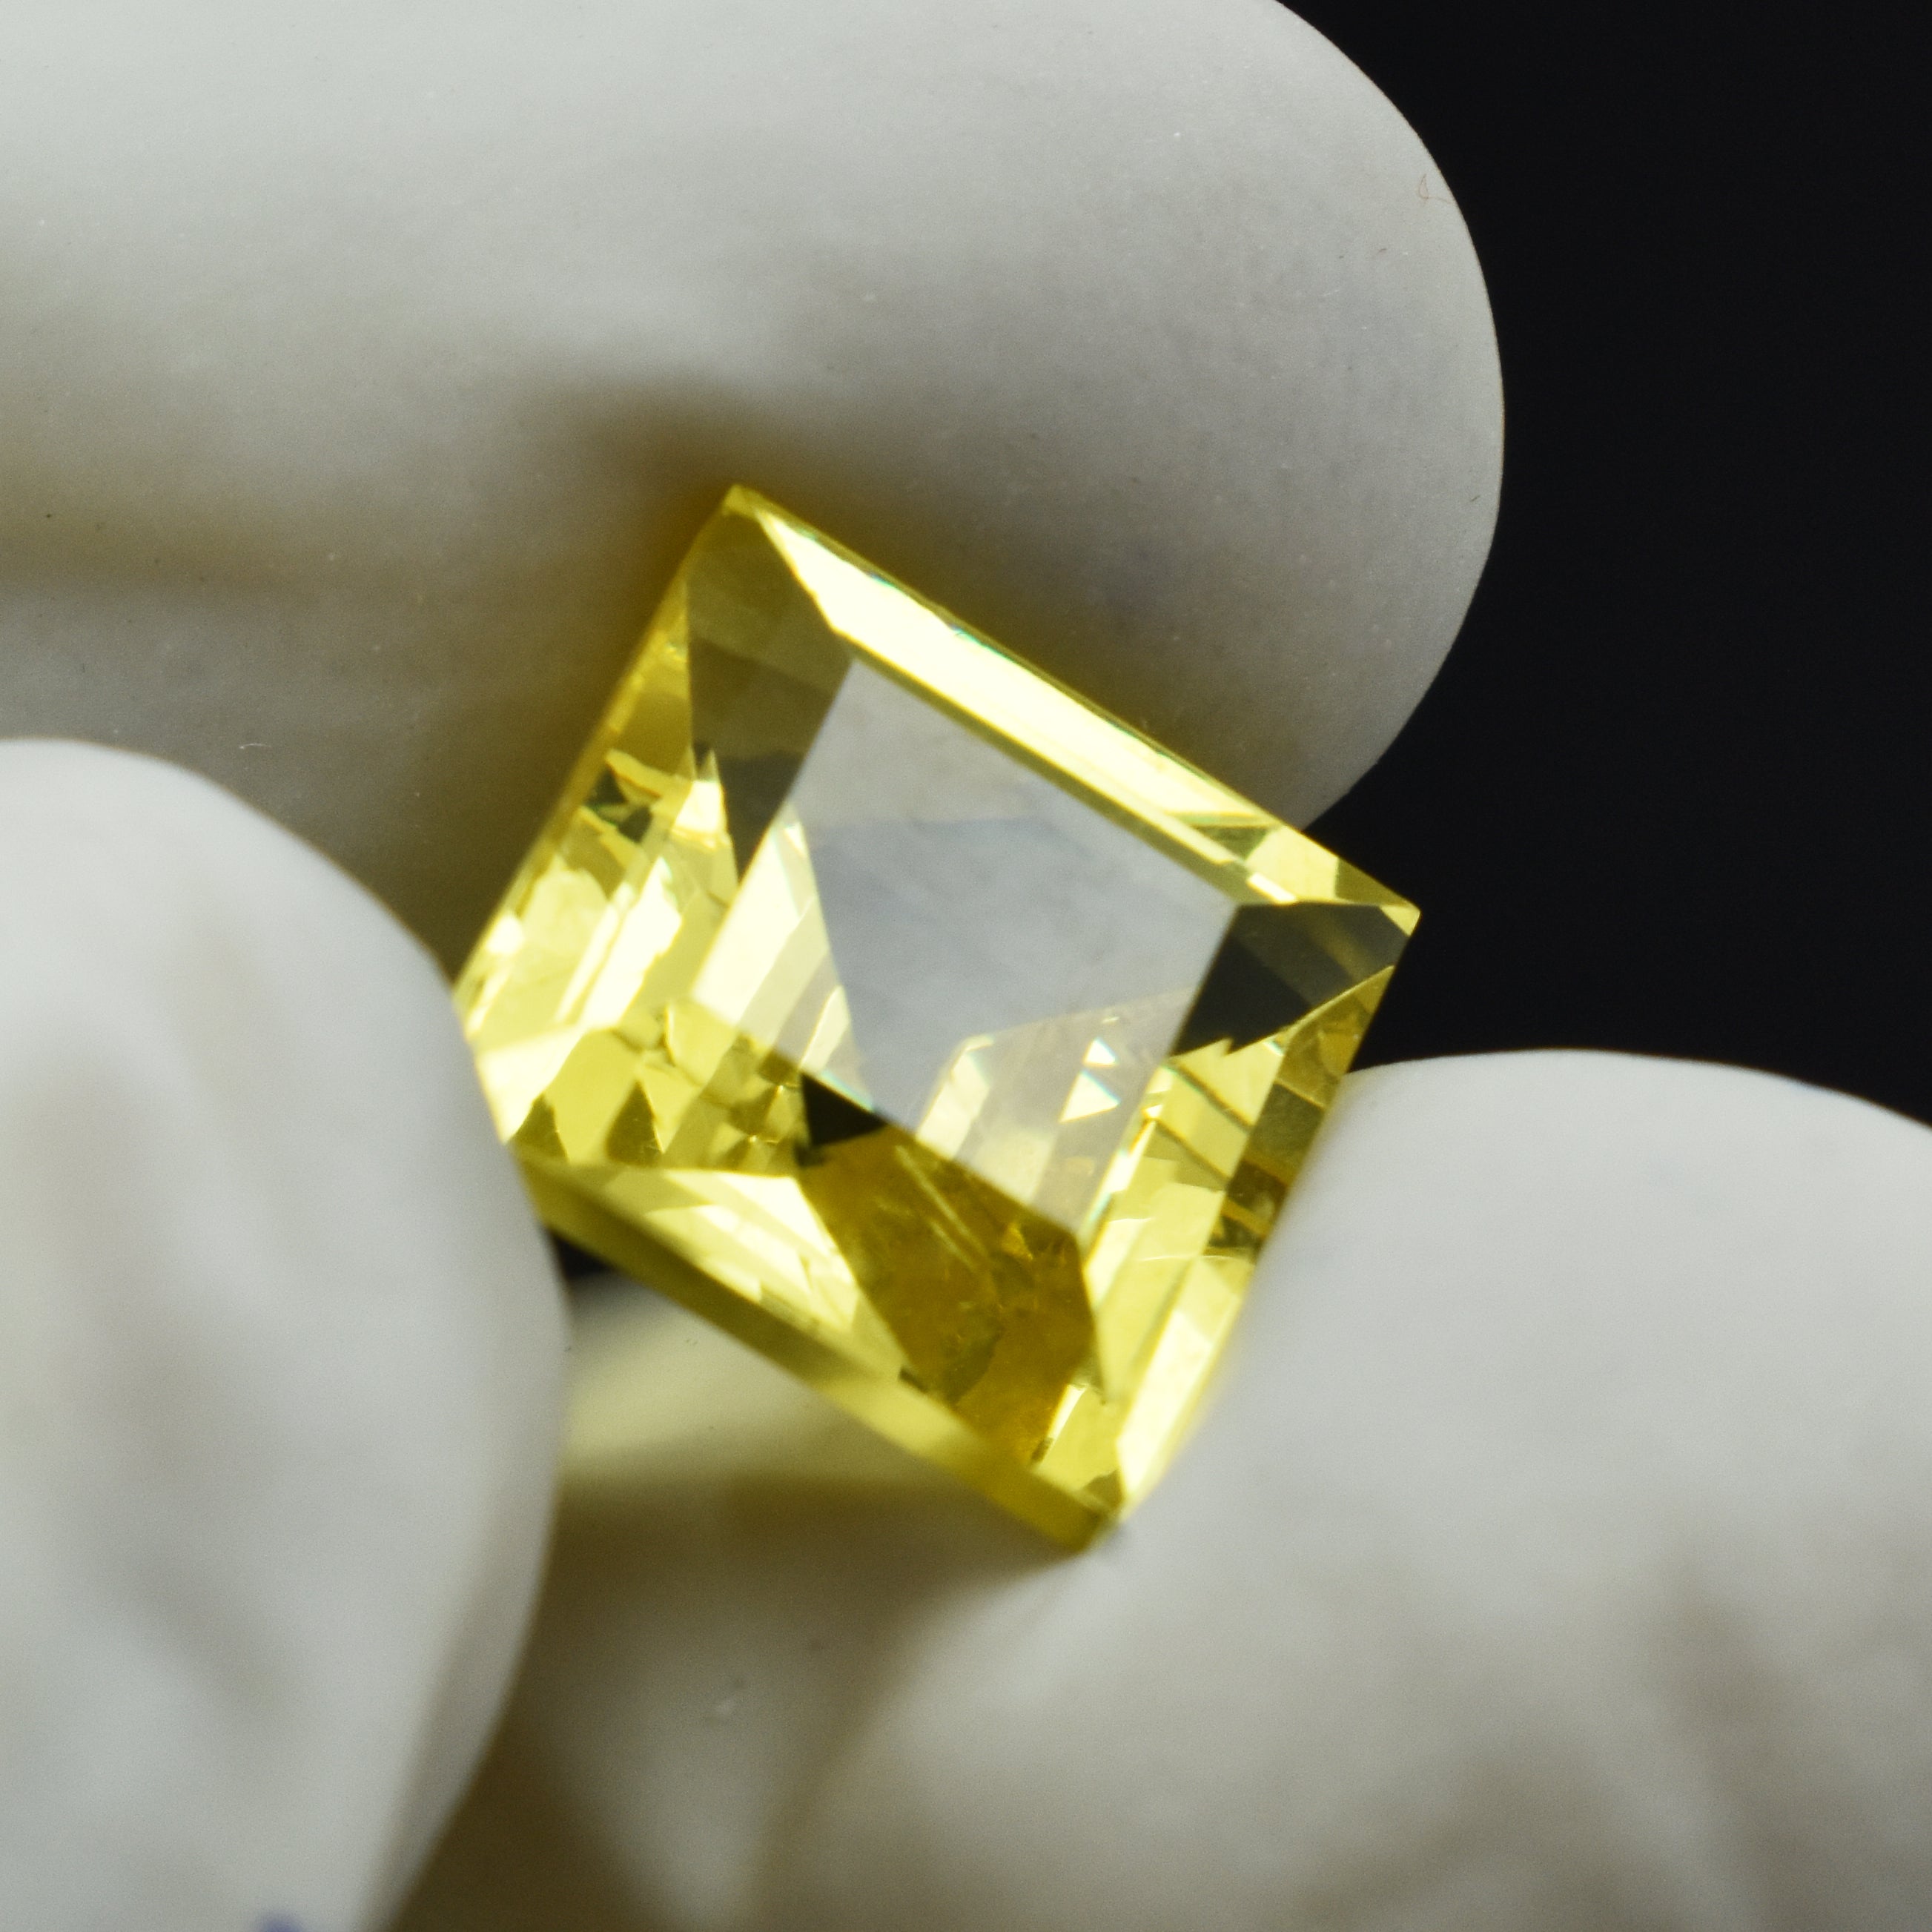 10.23 Carat Certified Yellow Sapphire Square Shape Gemstone Yellow Sapphire birthstone Of December Gemstone | Free Delivery & Gift | Gift For Her/him